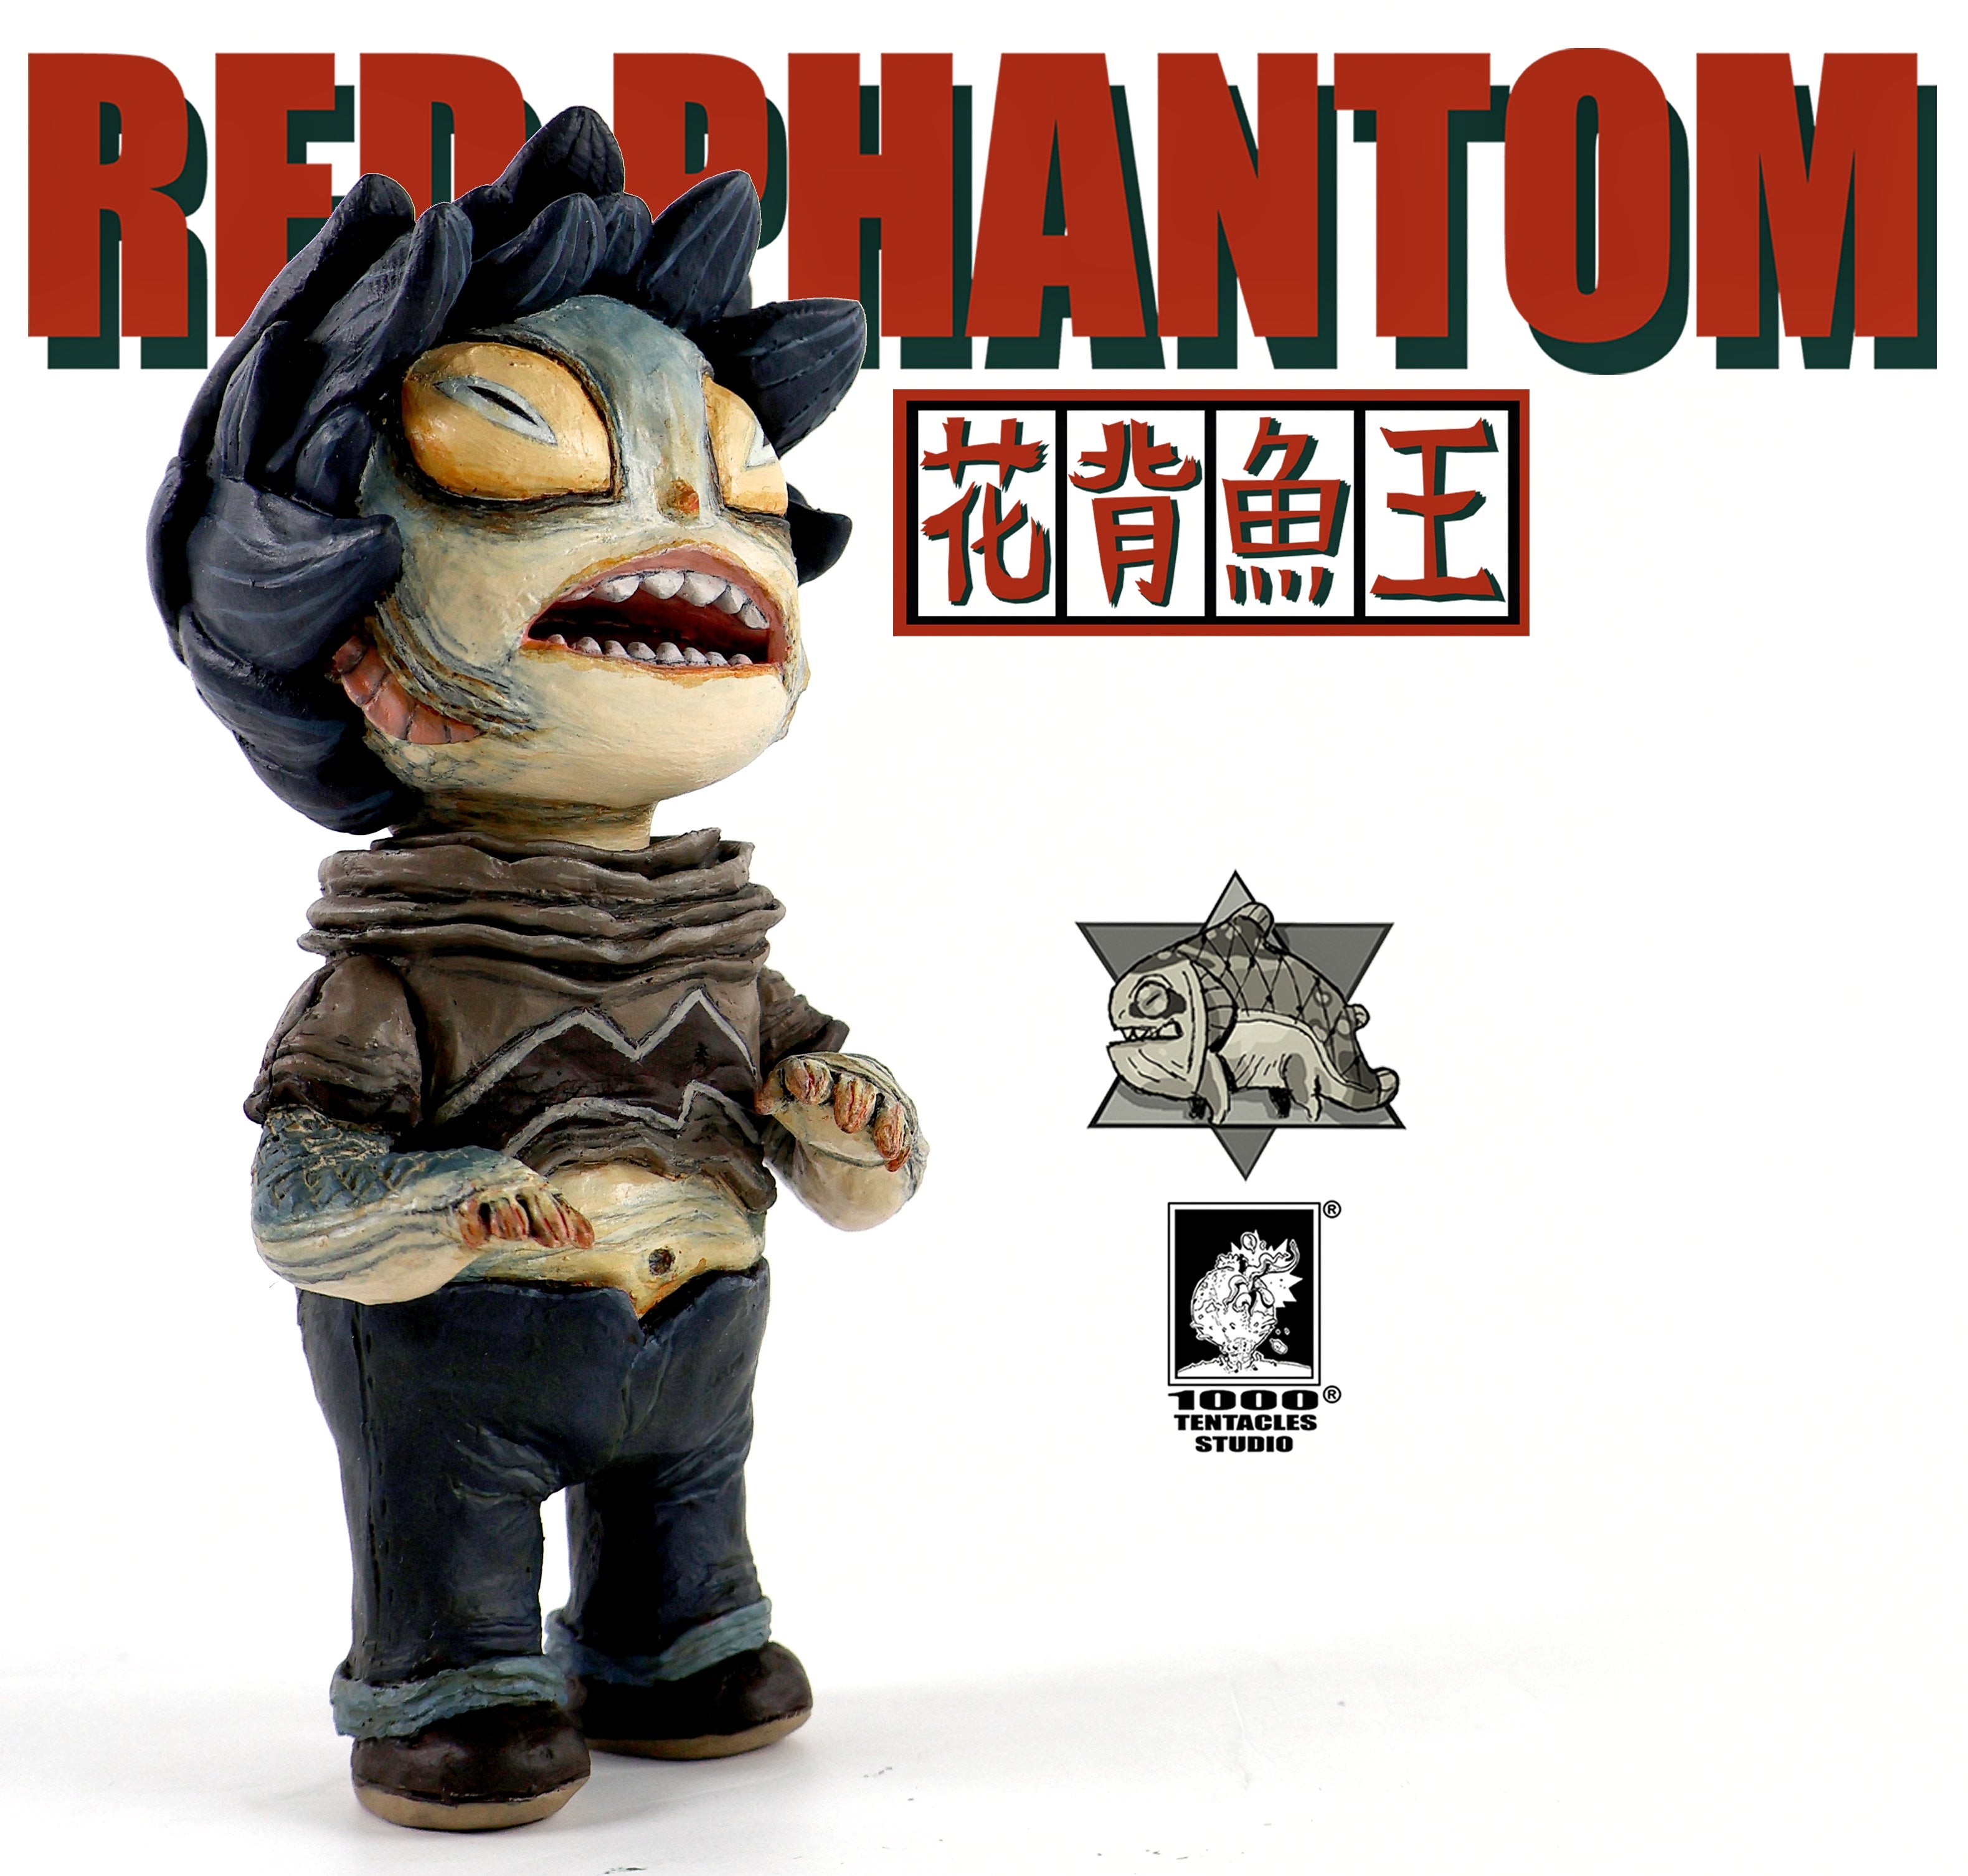 Red Phantom by 1000 Tentacles - Preorder